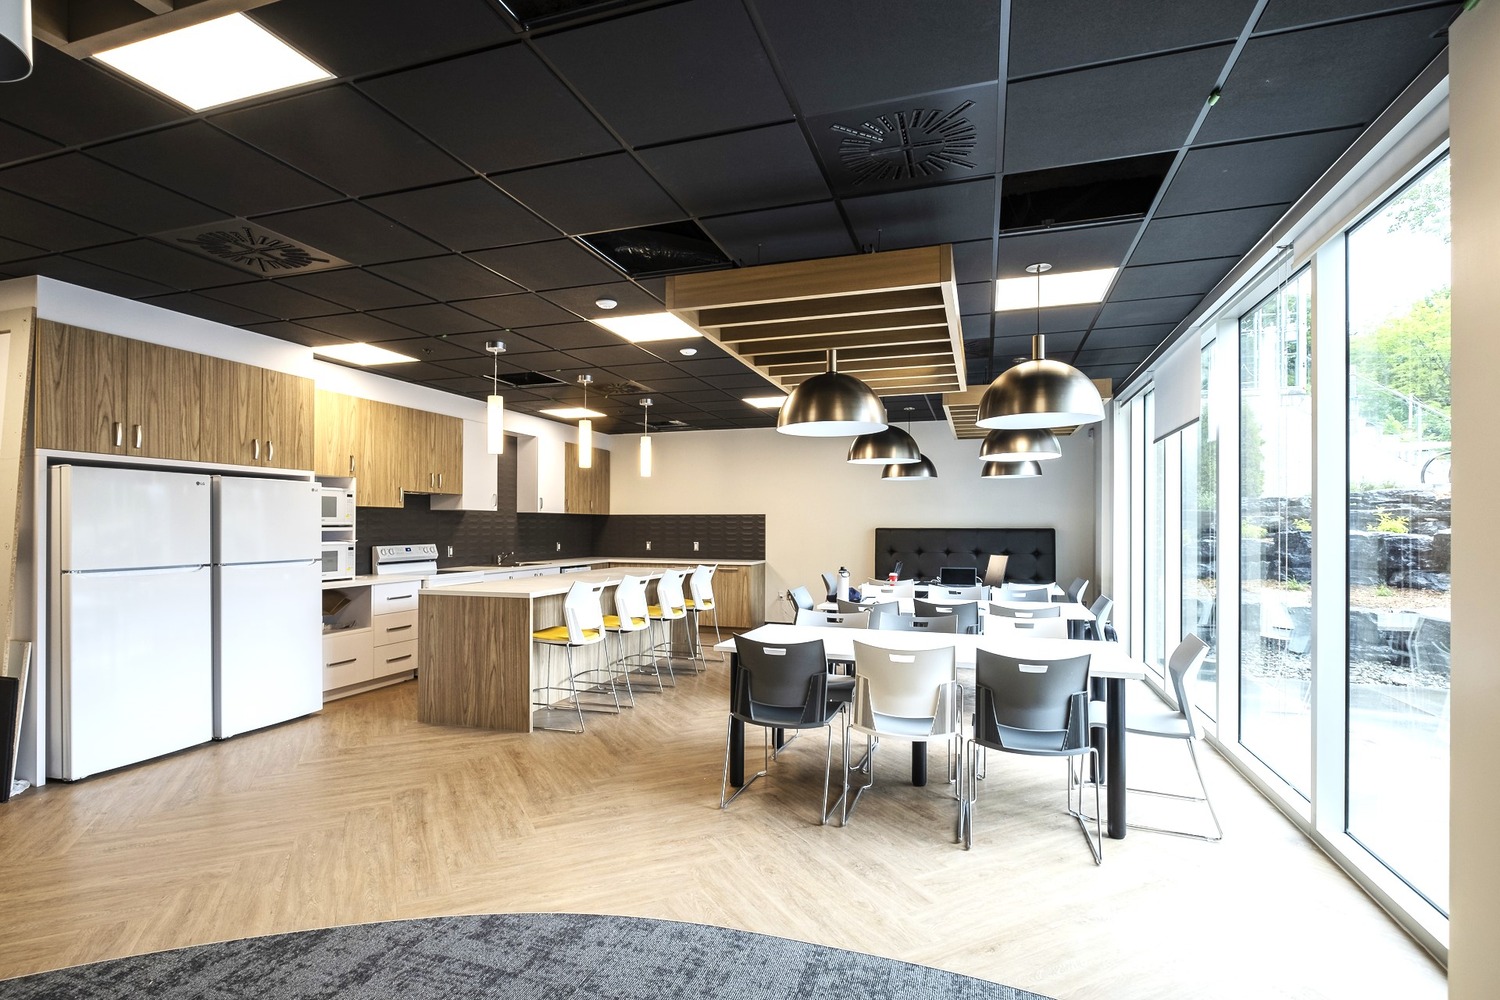 A modern communal kitchen and dining area with wooden floors, white and wooden cabinets, a large dining table with grey and white chairs, and pendant lighting. Large windows allow natural light to enter.